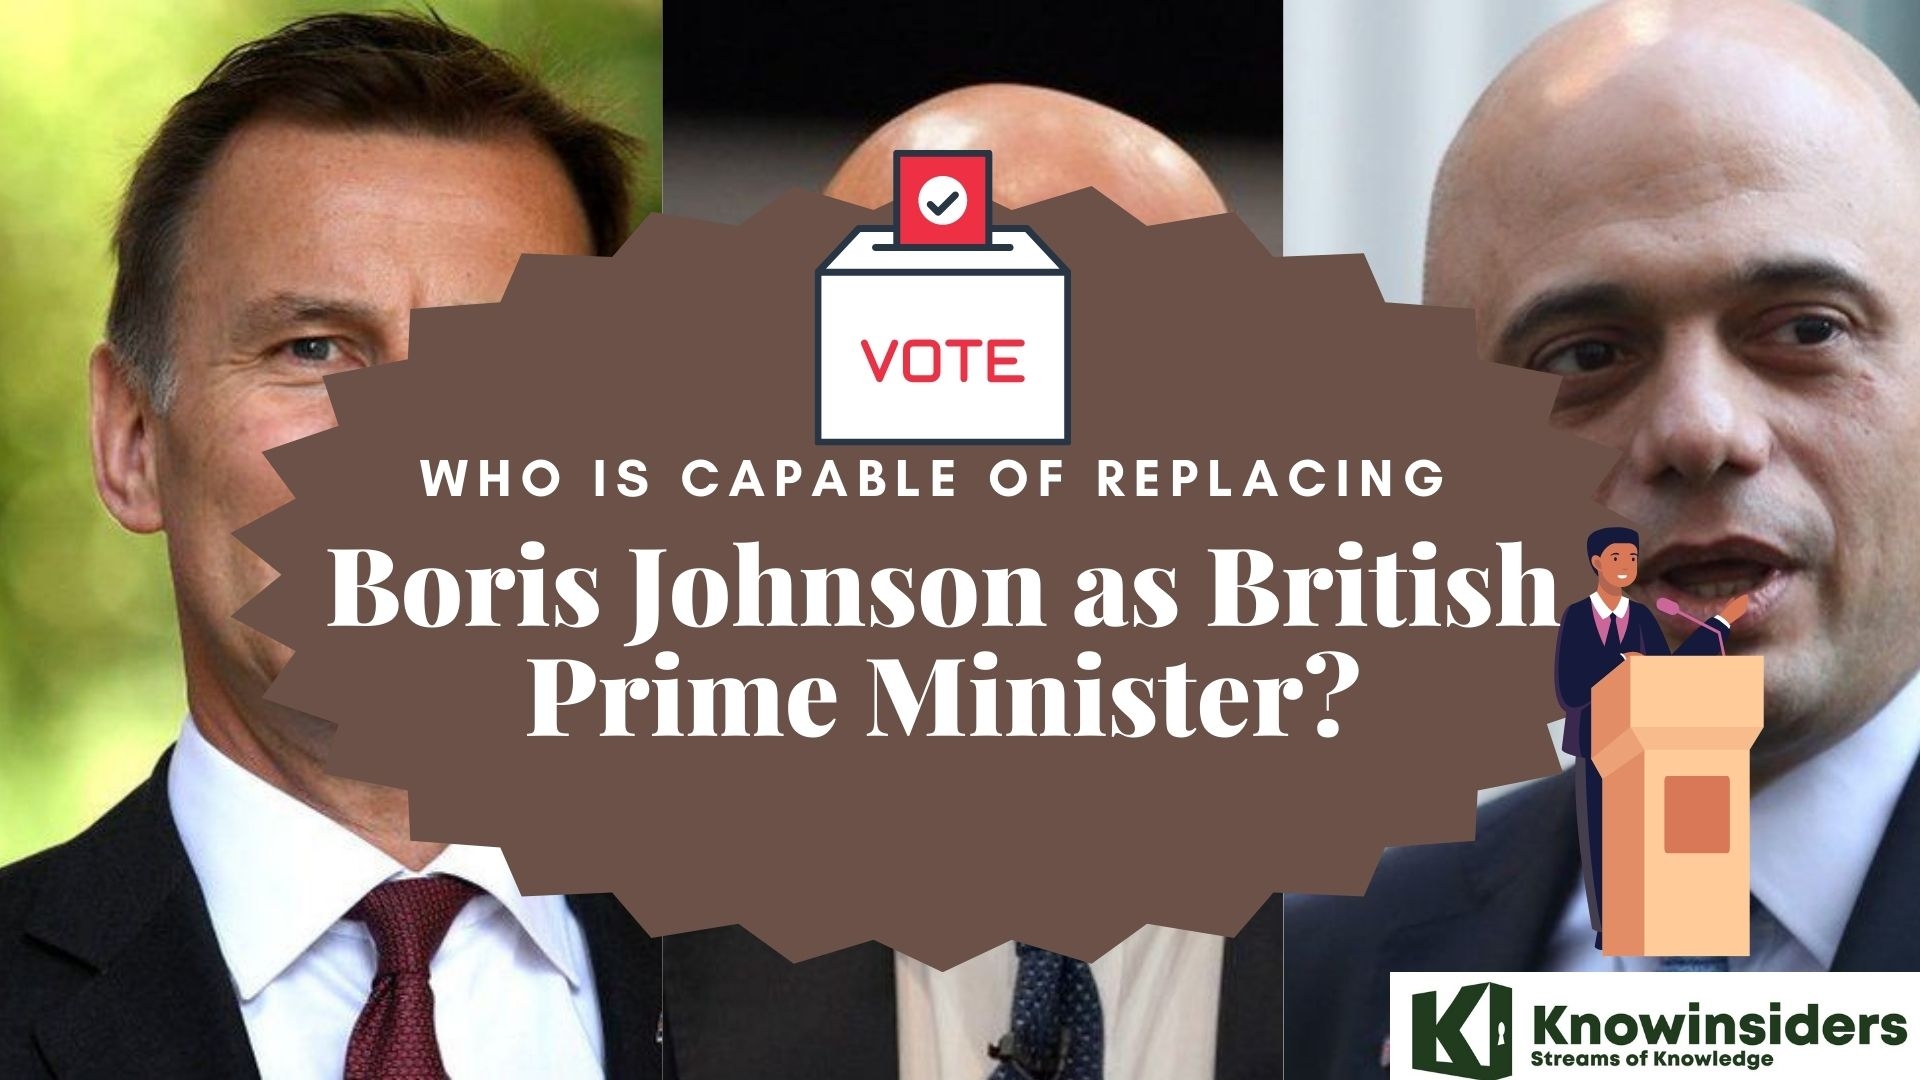 Who Is Capable Of Replacing Boris Johnson as British Prime Minister?